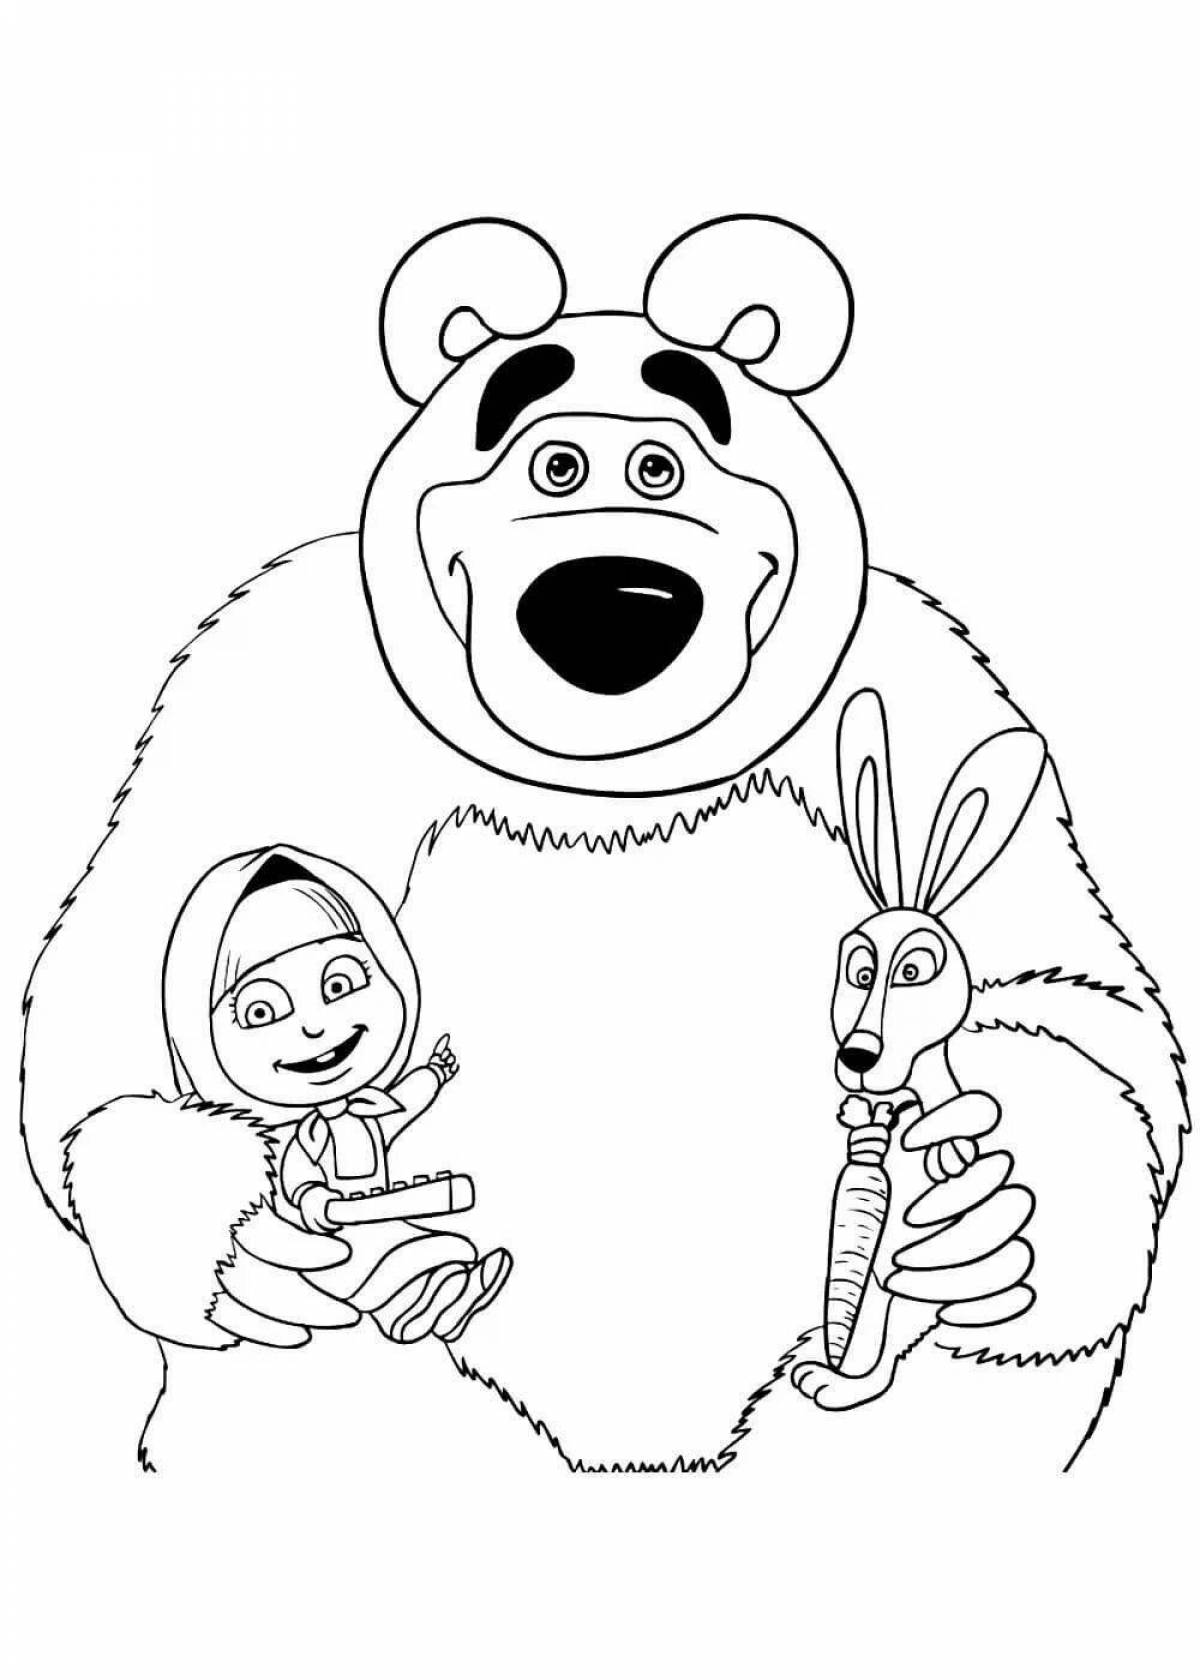 Coloring pages Masha and the bear